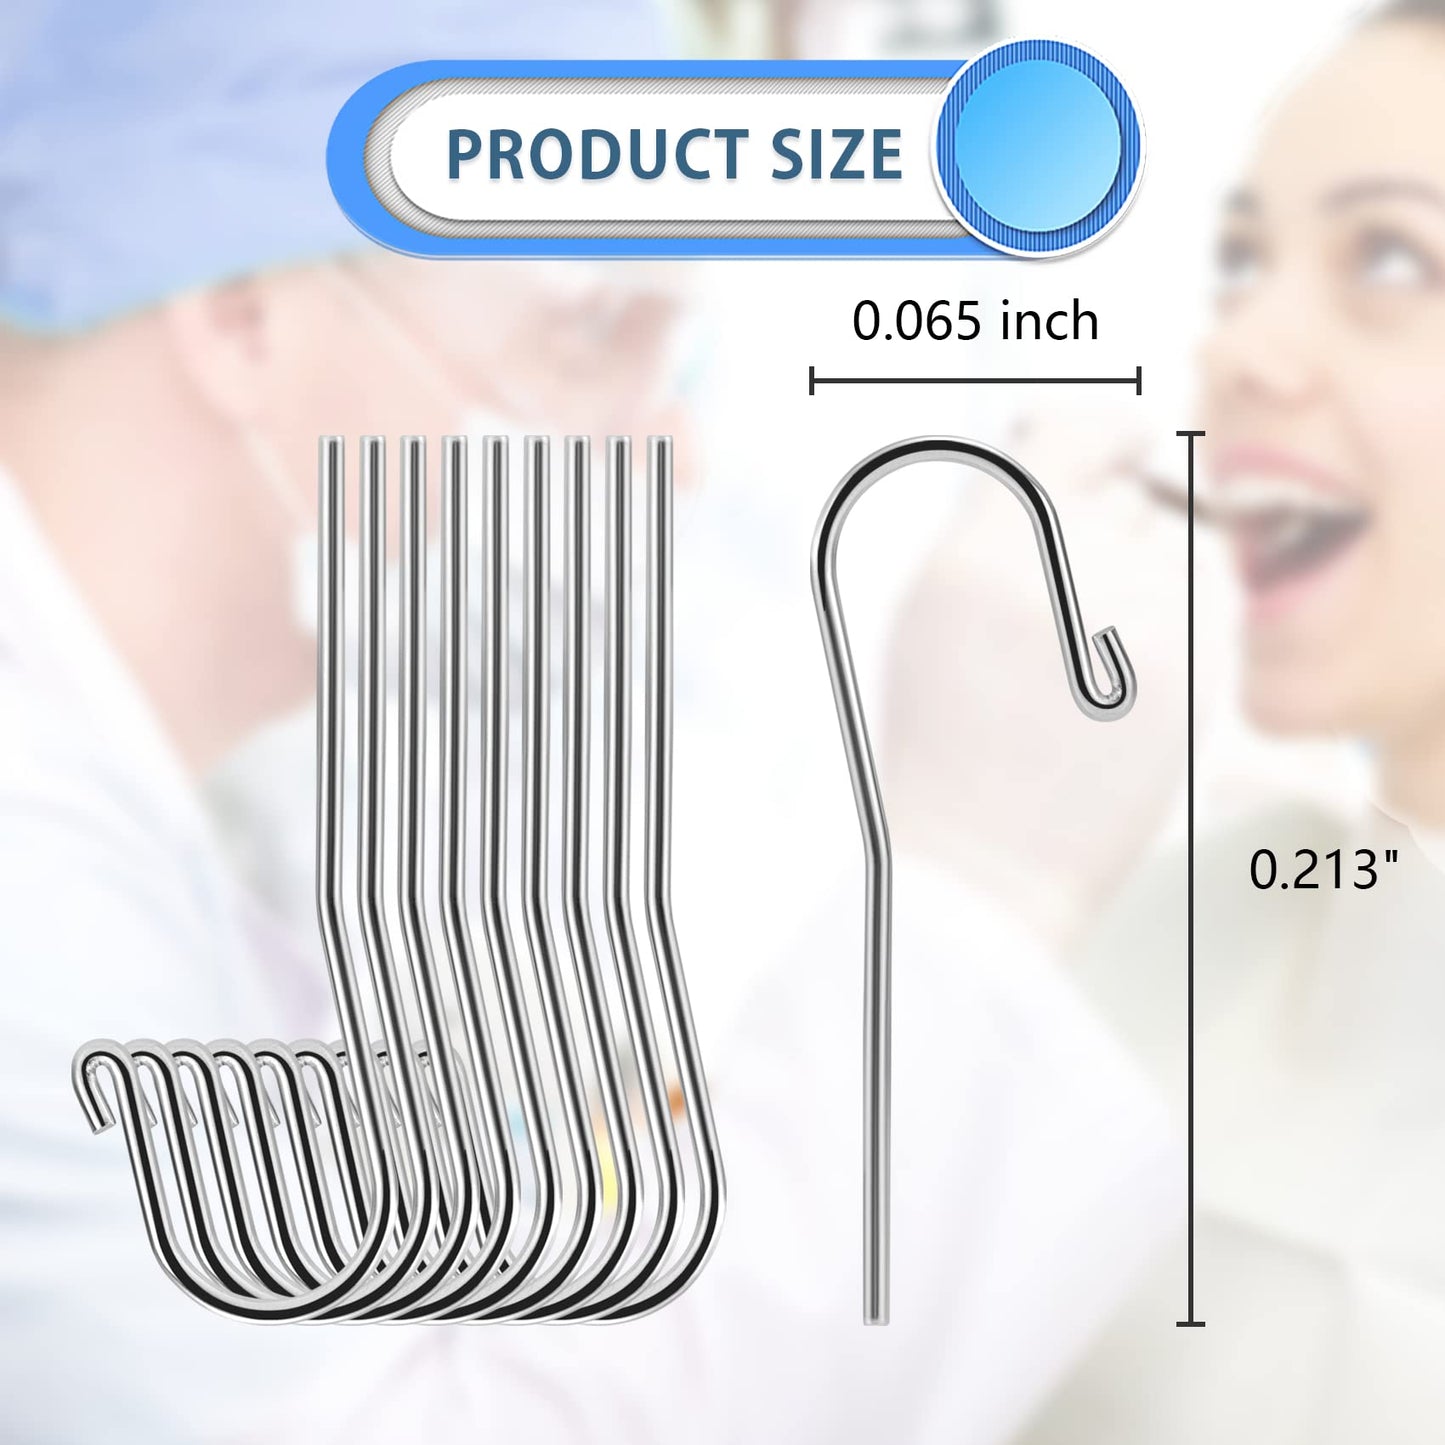 10Pcs Dental Lip Hooks for Apex Locator, Stainless Steel Tester Endo Instrument Tools Used for Dental Clinic, Lab Equipment - Acid and Rust Resistance 2 mm